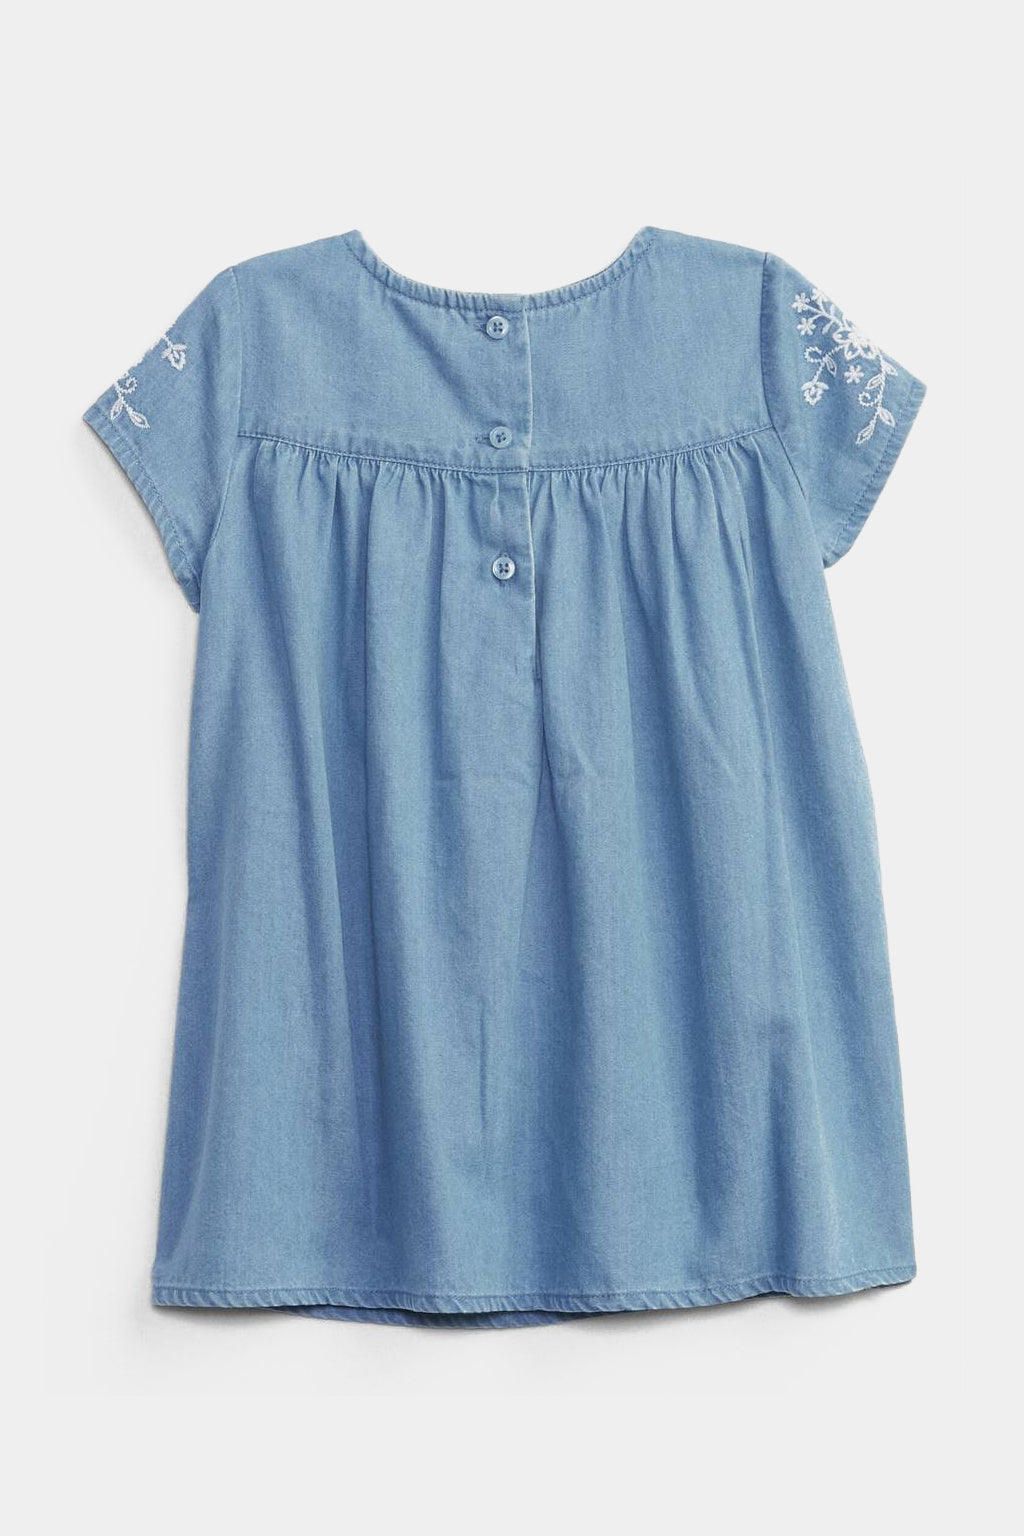 Gap - Baby Embroidered Denim Dress with Washwell